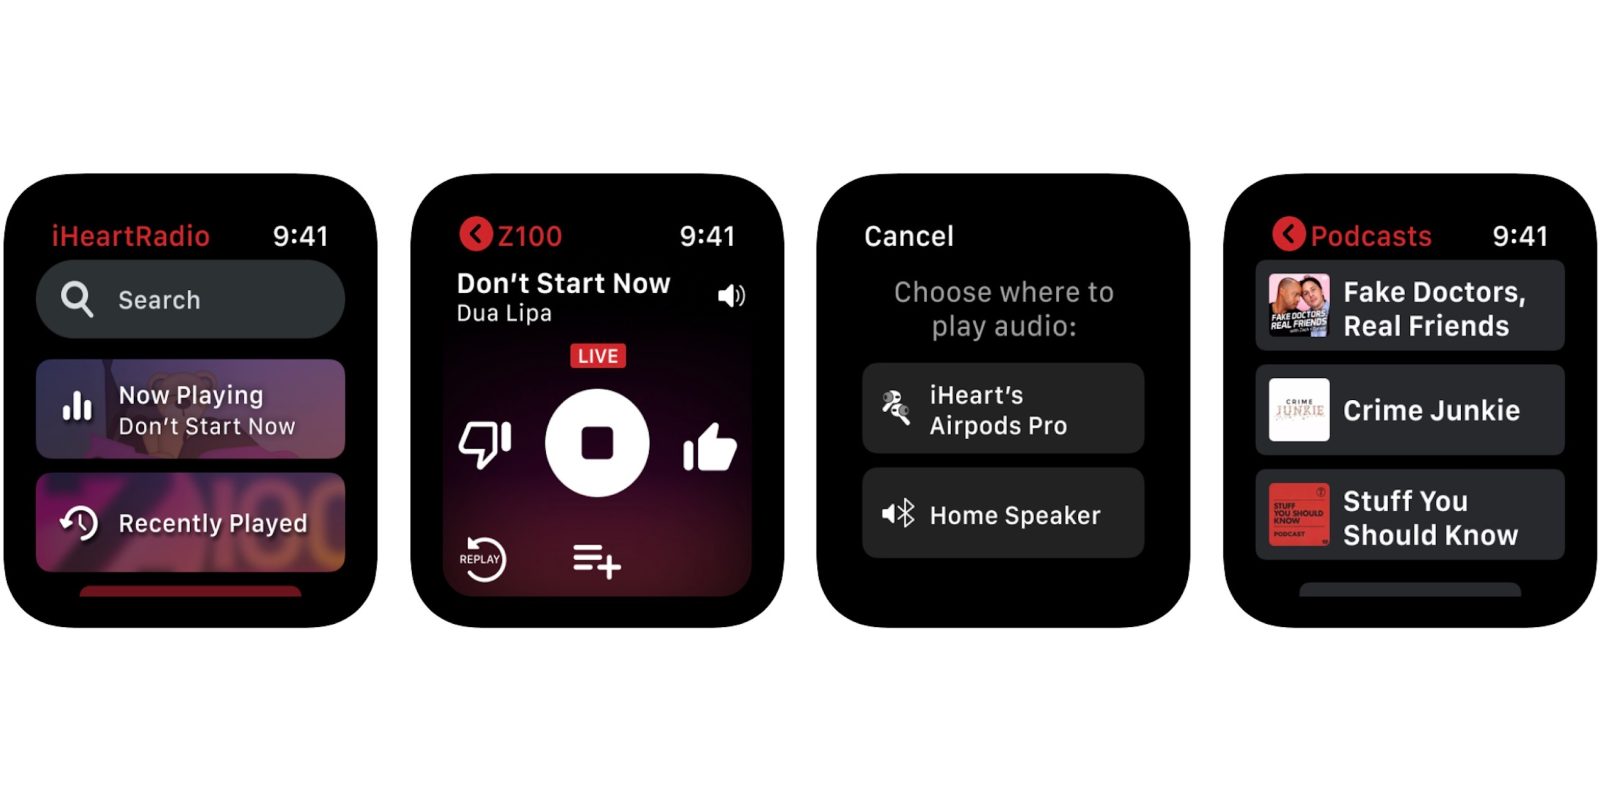 iHeartRadio Apple Watch app streaming support